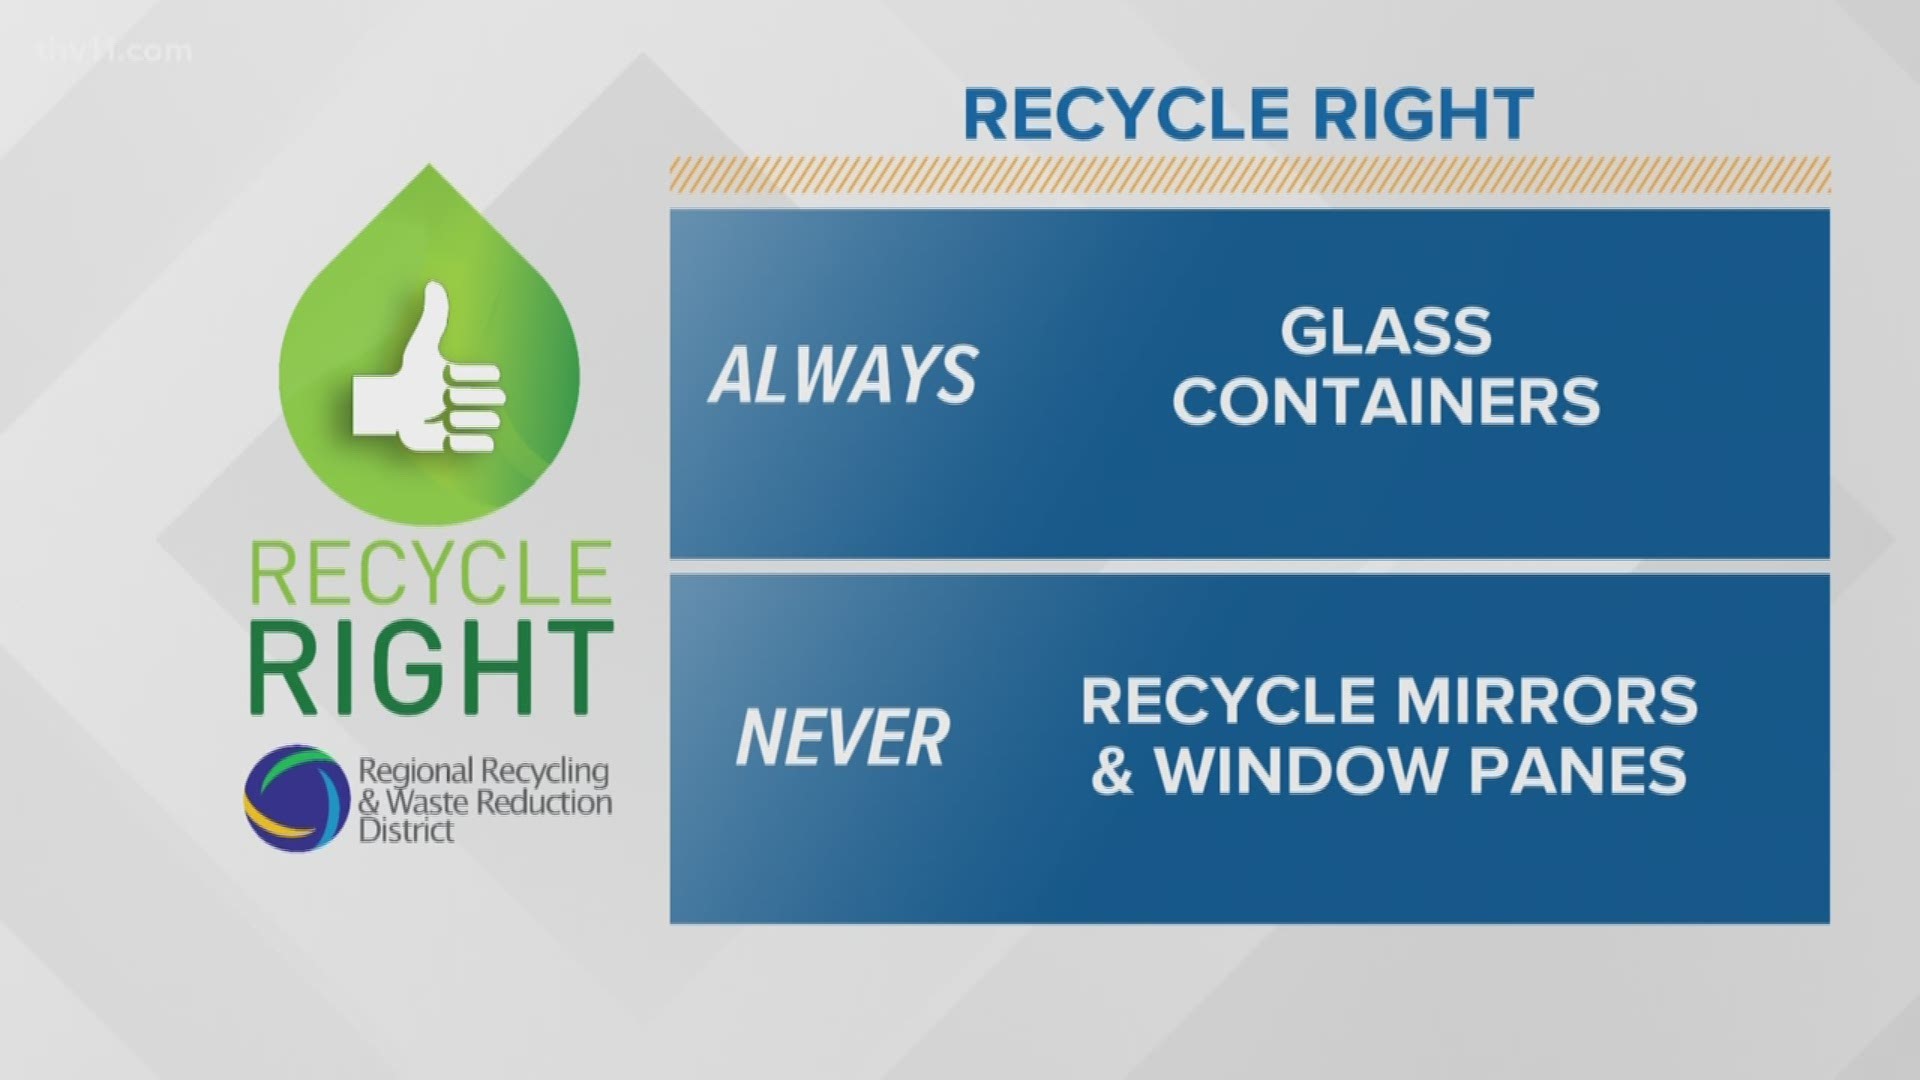 Meteorologist Mariel Ruiz with your recycle right tip for week 19.